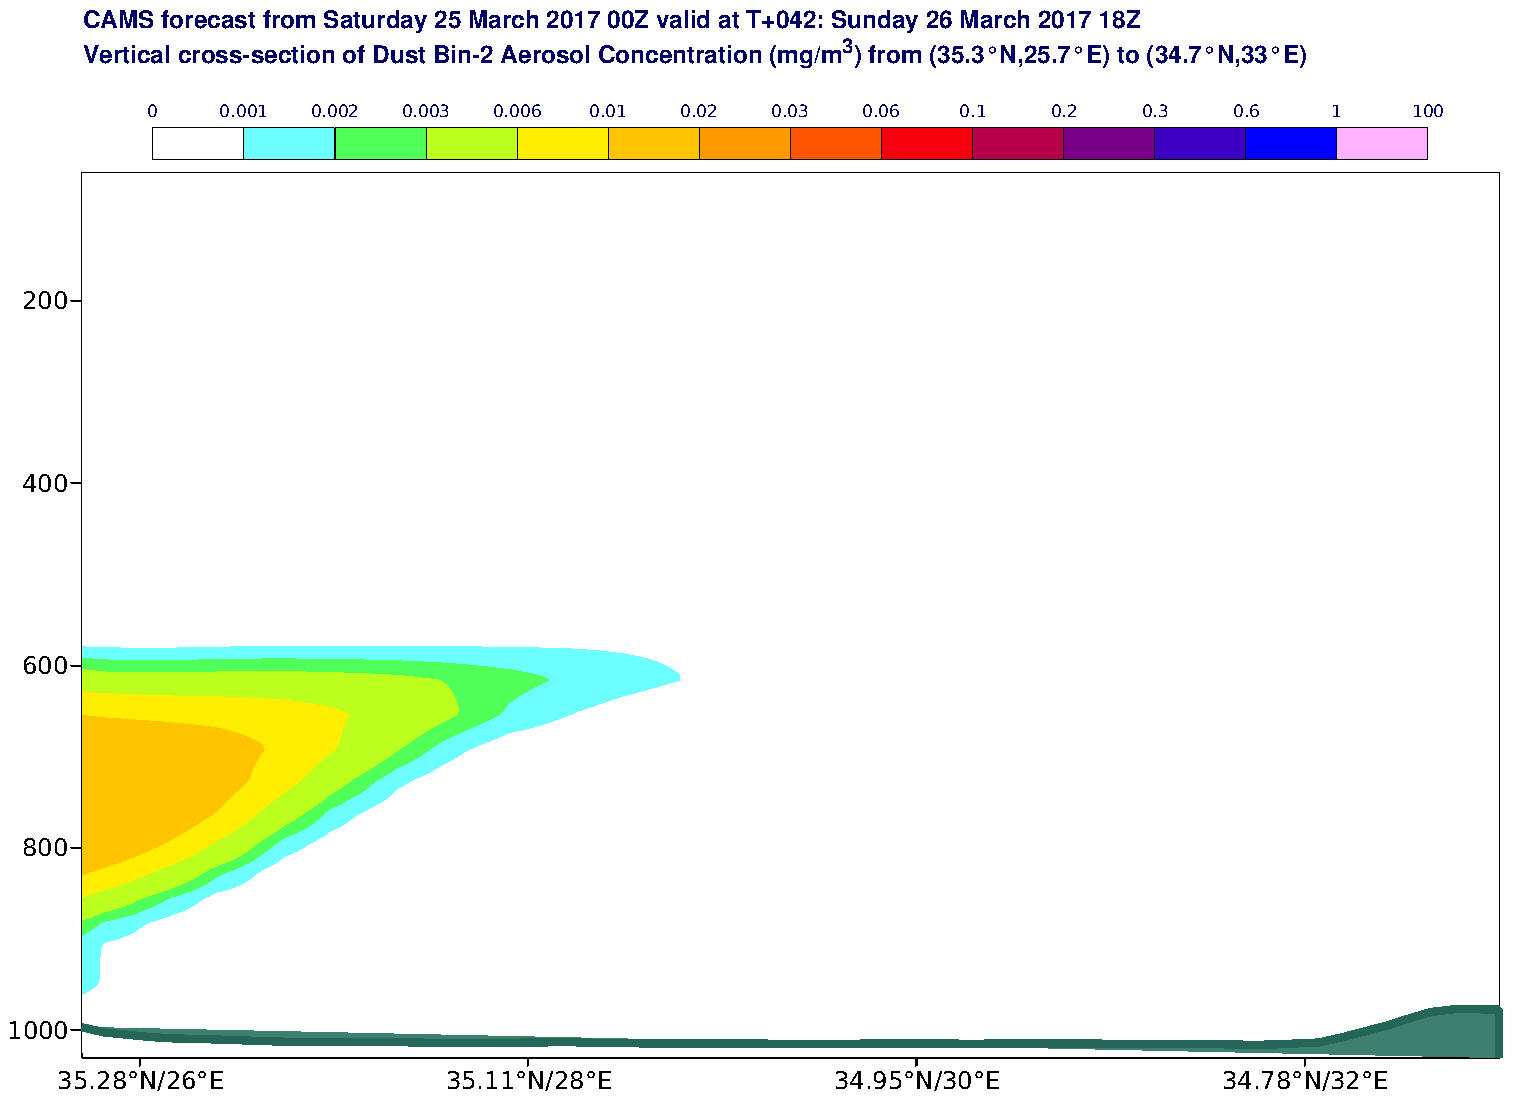 Vertical cross-section of Dust Bin-2 Aerosol Concentration (mg/m3) valid at T42 - 2017-03-26 18:00